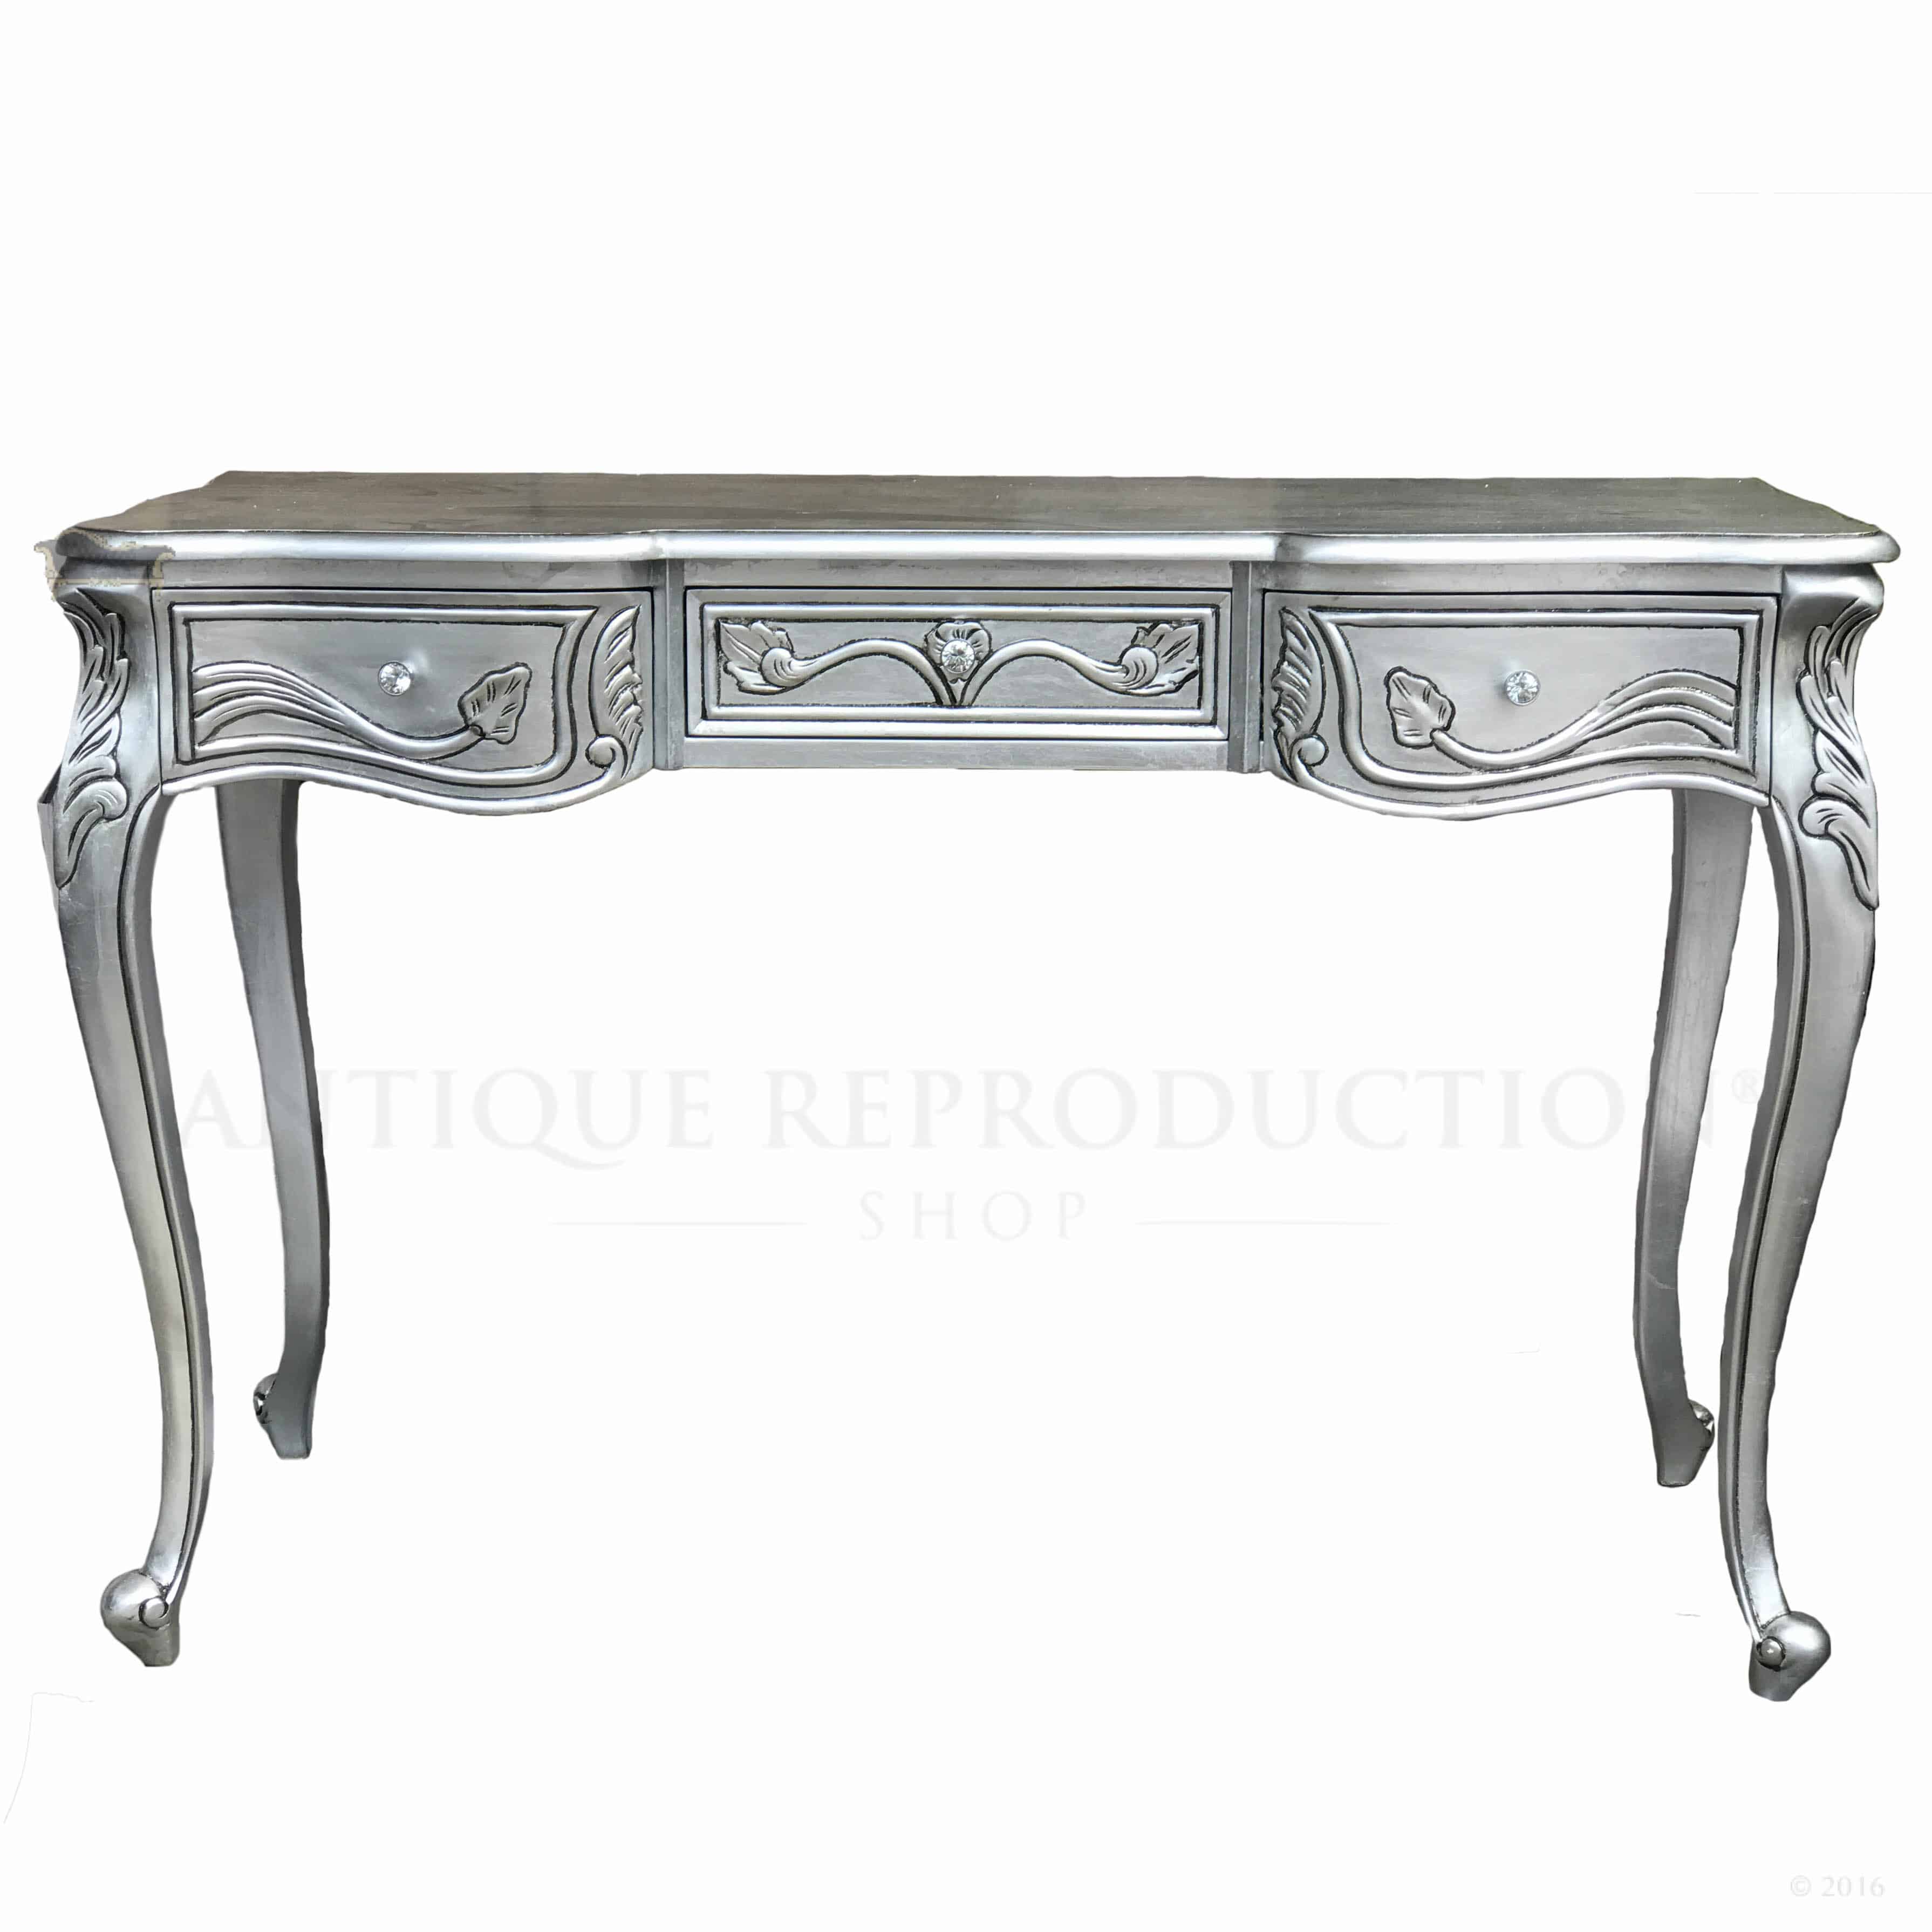 French Provincial Louis Console Table Or Desk Antique Silver With